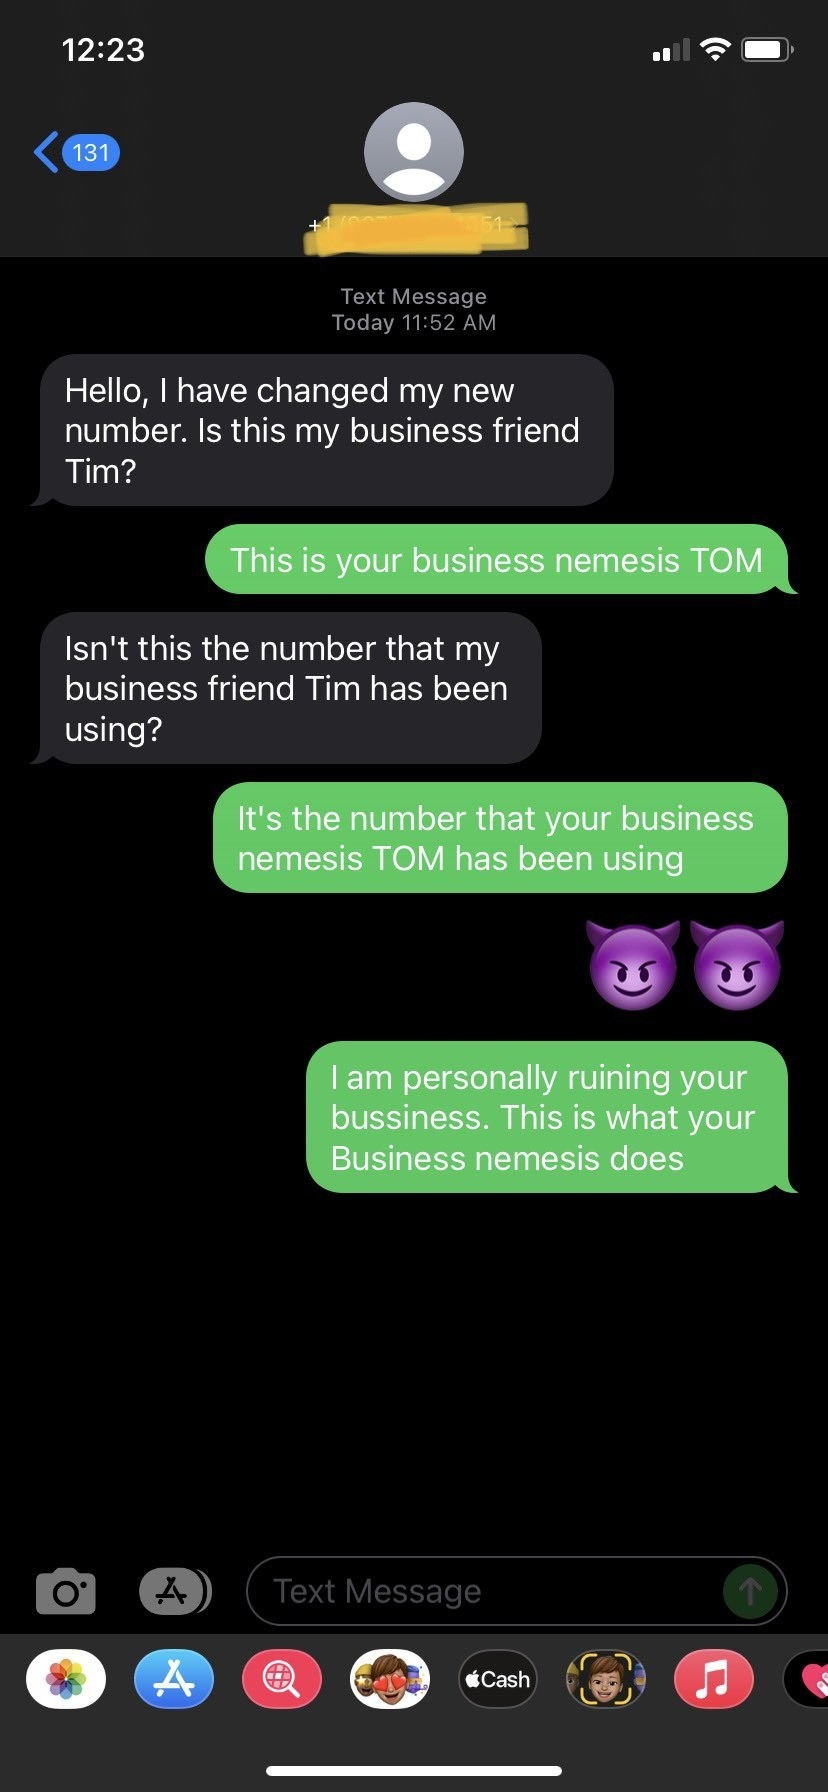 Scammer who texts someone about a business partner named Tim, and they text back they are their business enemy Tom